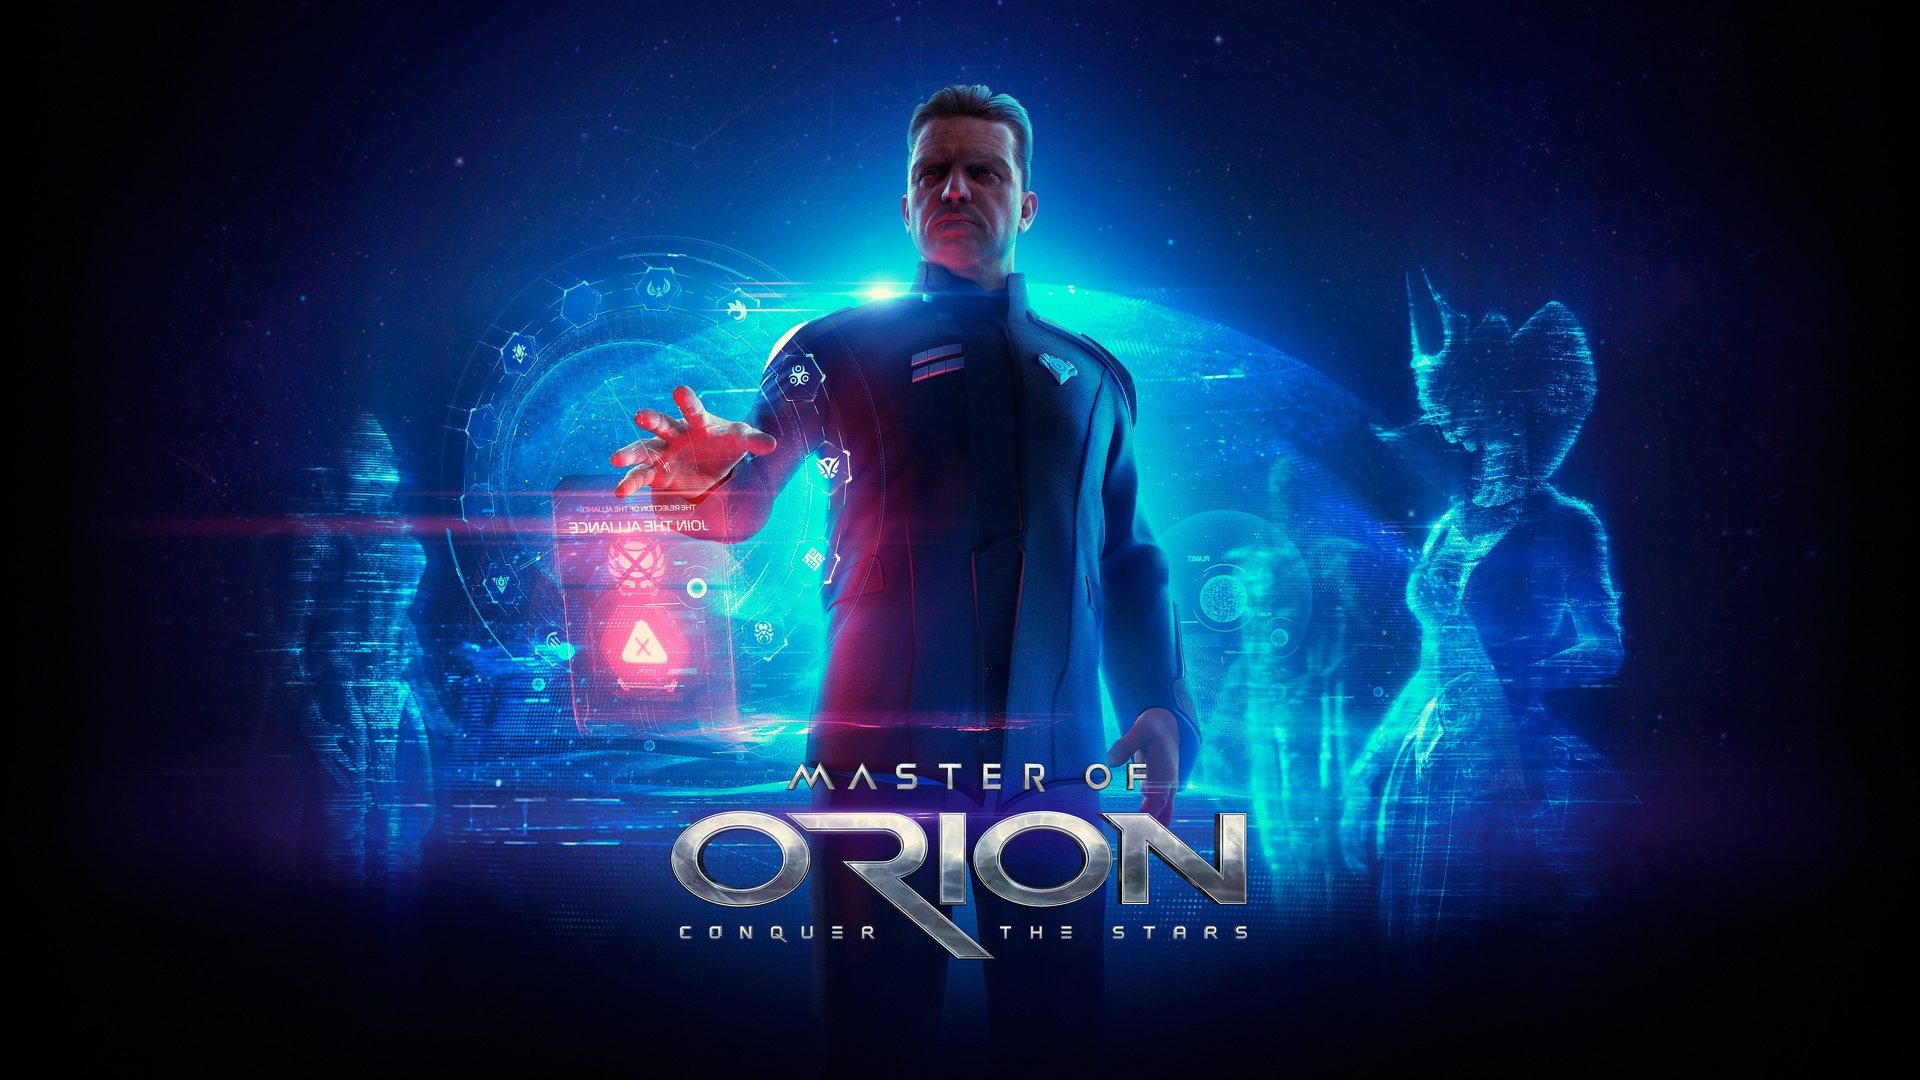 Master of Orion - Conquer the Stars.jpg